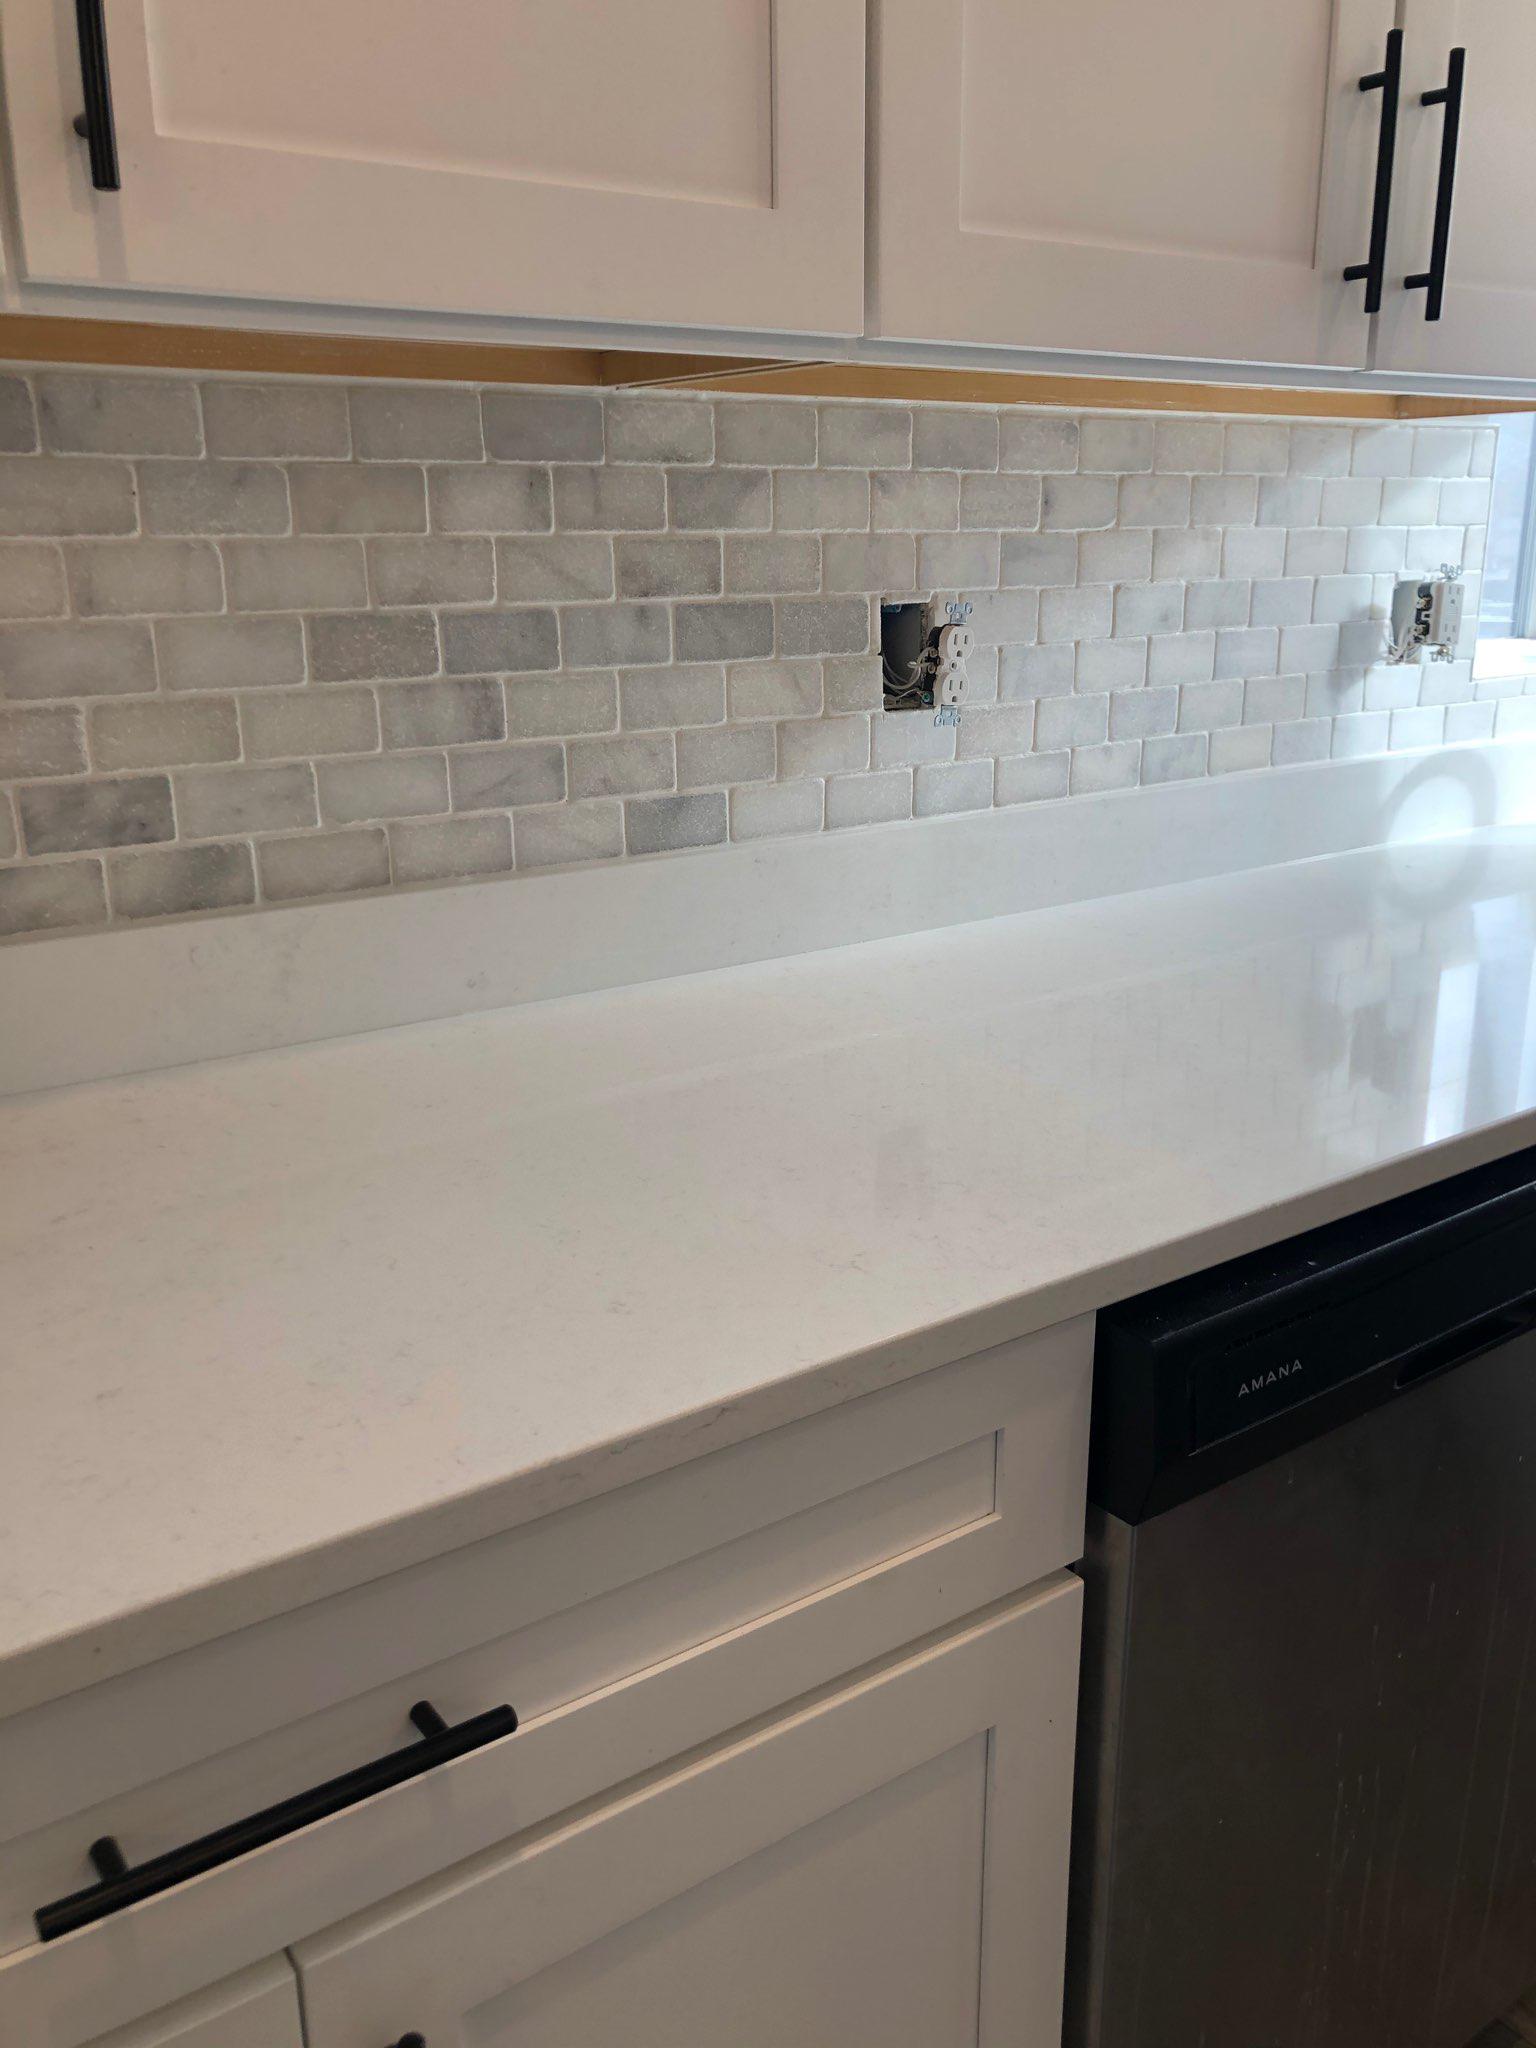 Gorgeous Backsplash being installed today!! We are out in Tempe this morning to install this beautiful new build. It looks flawless in this house! ï¿¼ Call Home Solutionz Today For Your Flooring Project <(623) 289-3880>. Home Solutionz - Tempe is Licensed, Bonded, and Insured. Home Solutionz offers 12 - 24 Months 0% Financing Through Wells Fargo. Home Solutionz Tempe - 3125 S 52nd St, Suite 107 Tempe, AZ 85282 United States  BacksplashInstallation  Backsplash